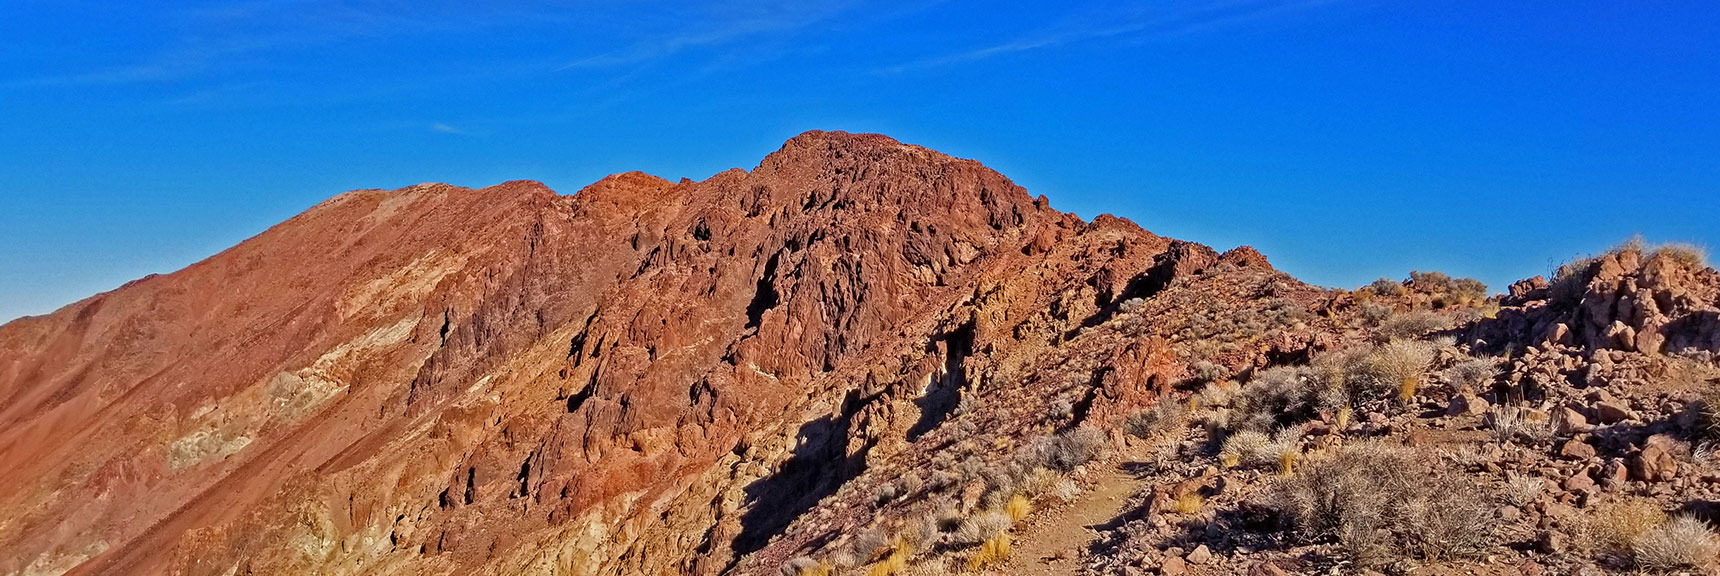 Nearing the Summit Red Rock Ridge of Mt. Perry | Dante's View to Mt. Perry | Death Valley National Park, CA